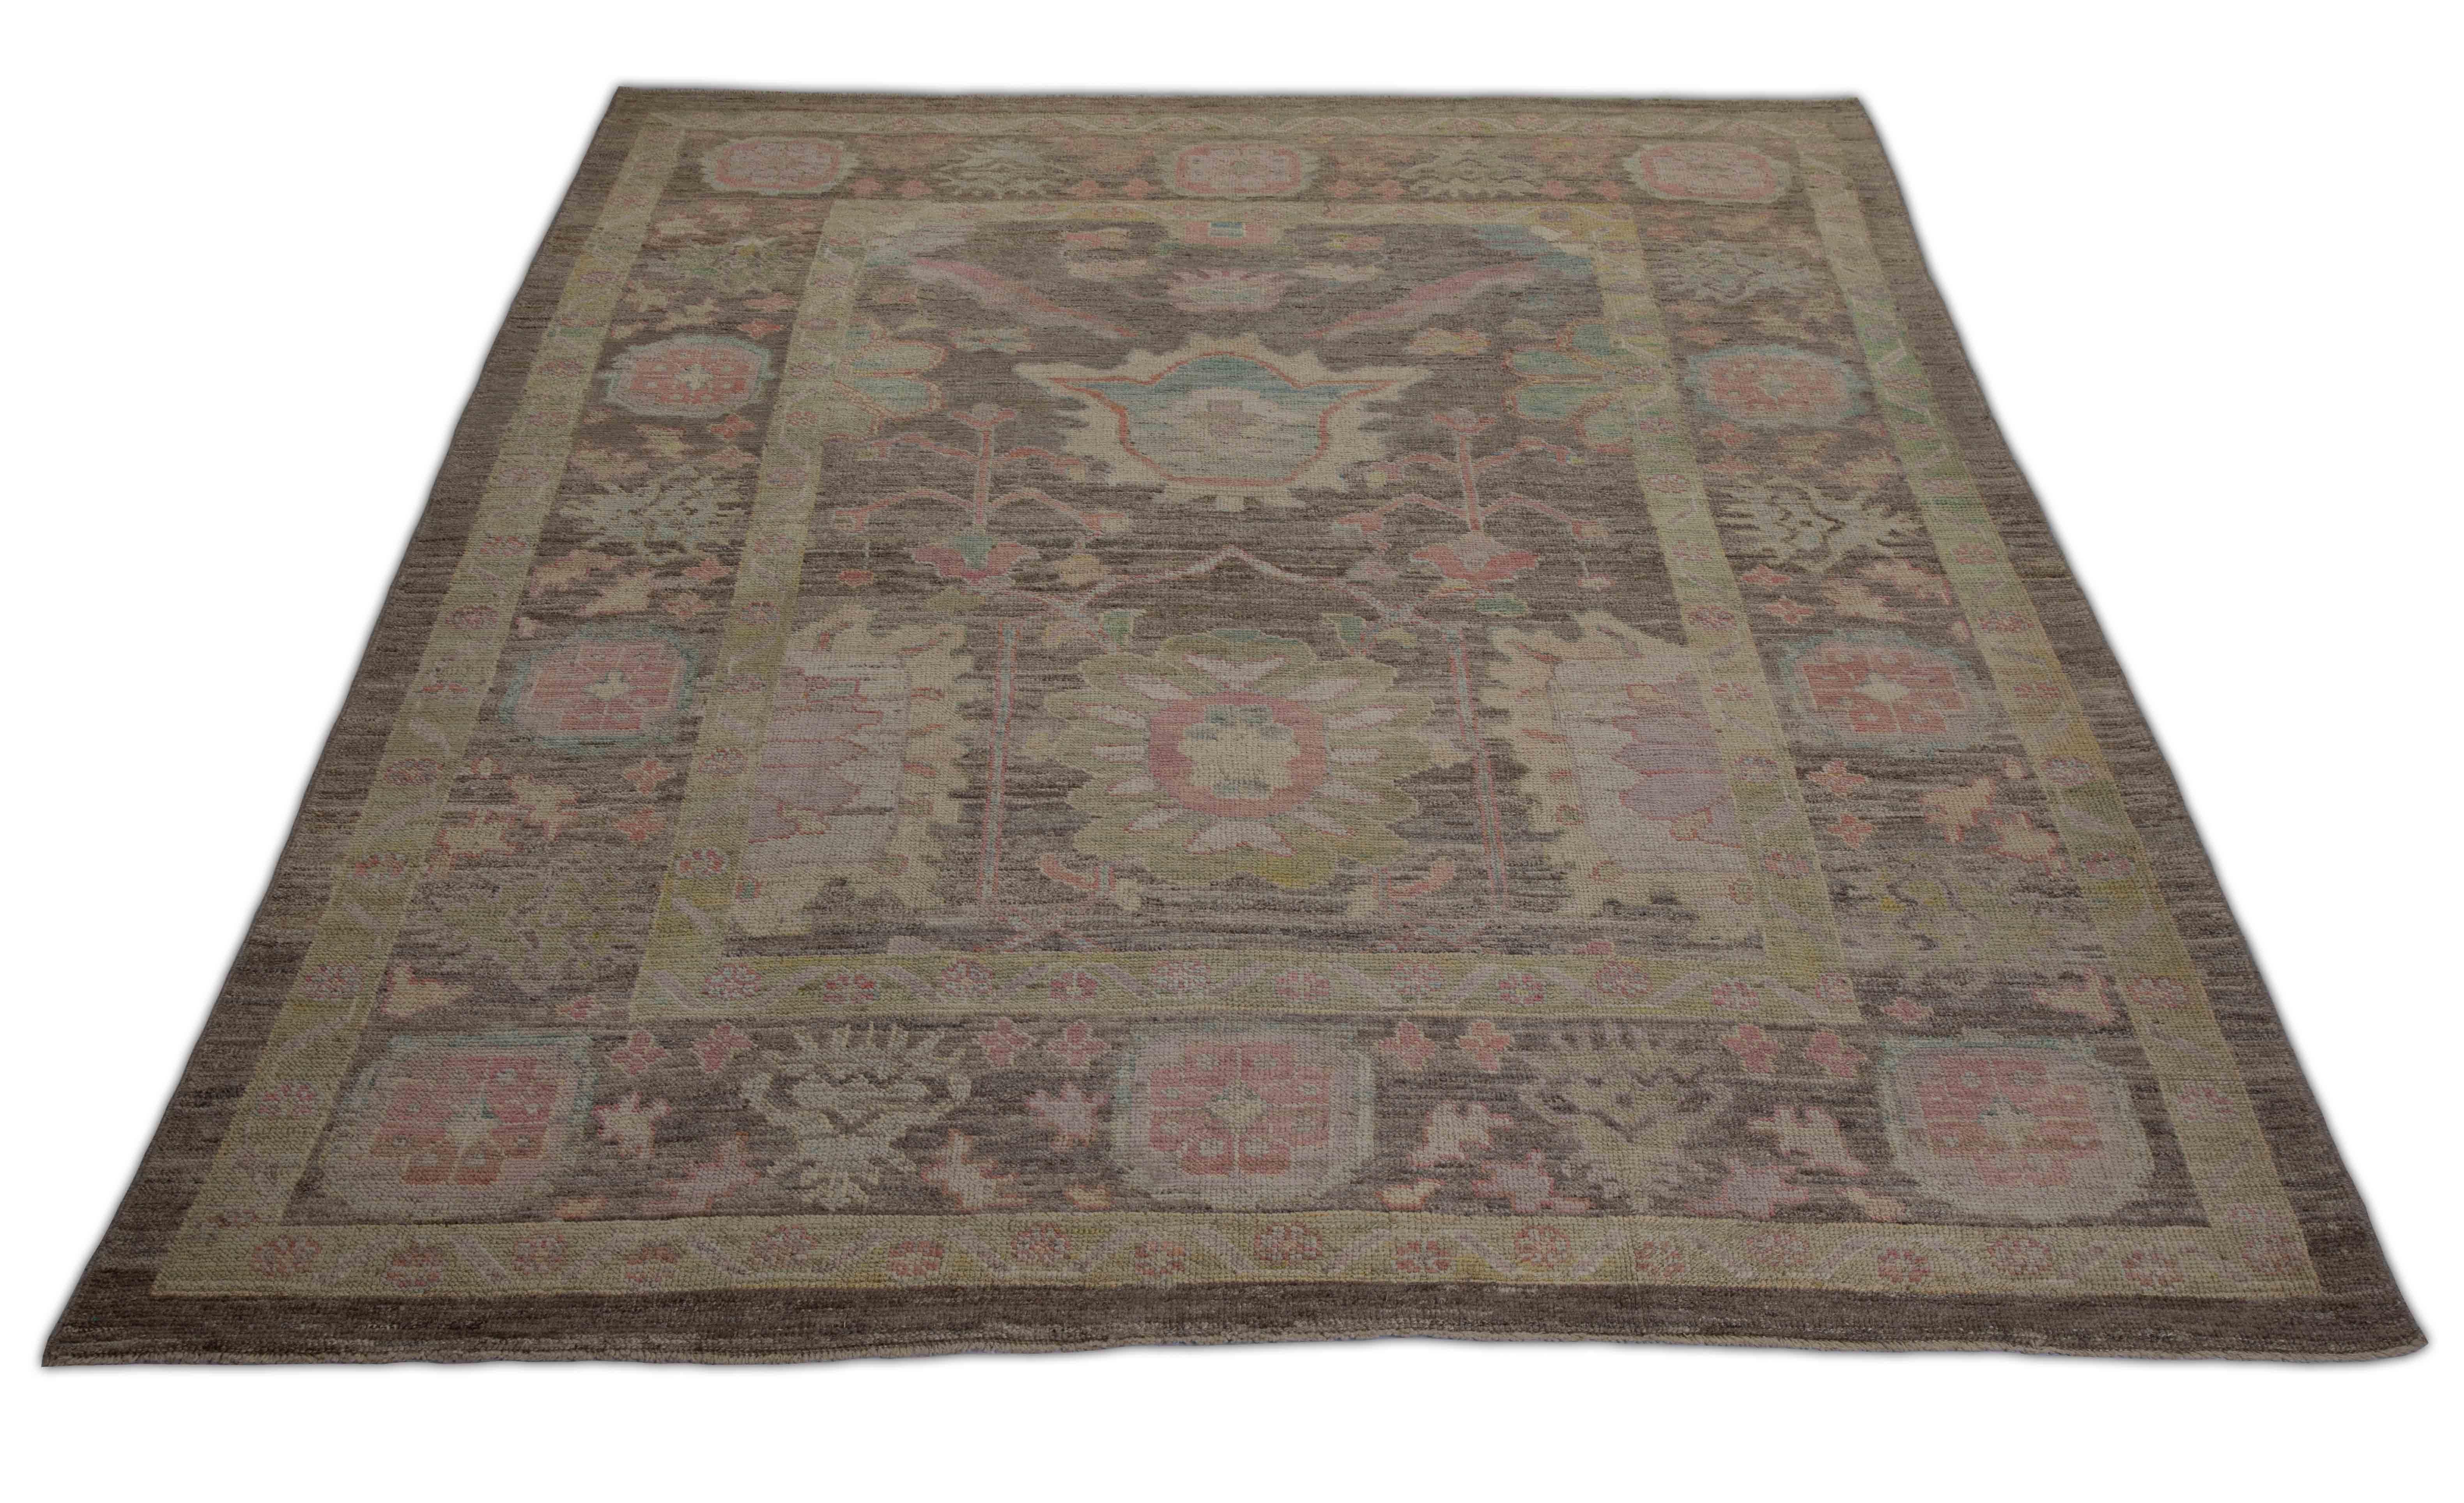 Contemporary Turkish rug made of handwoven sheep’s wool of the finest quality. It’s colored with organic vegetable dyes that are certified safe for humans and pets alike. It features a large, brown field with big flower heads in pink associated with